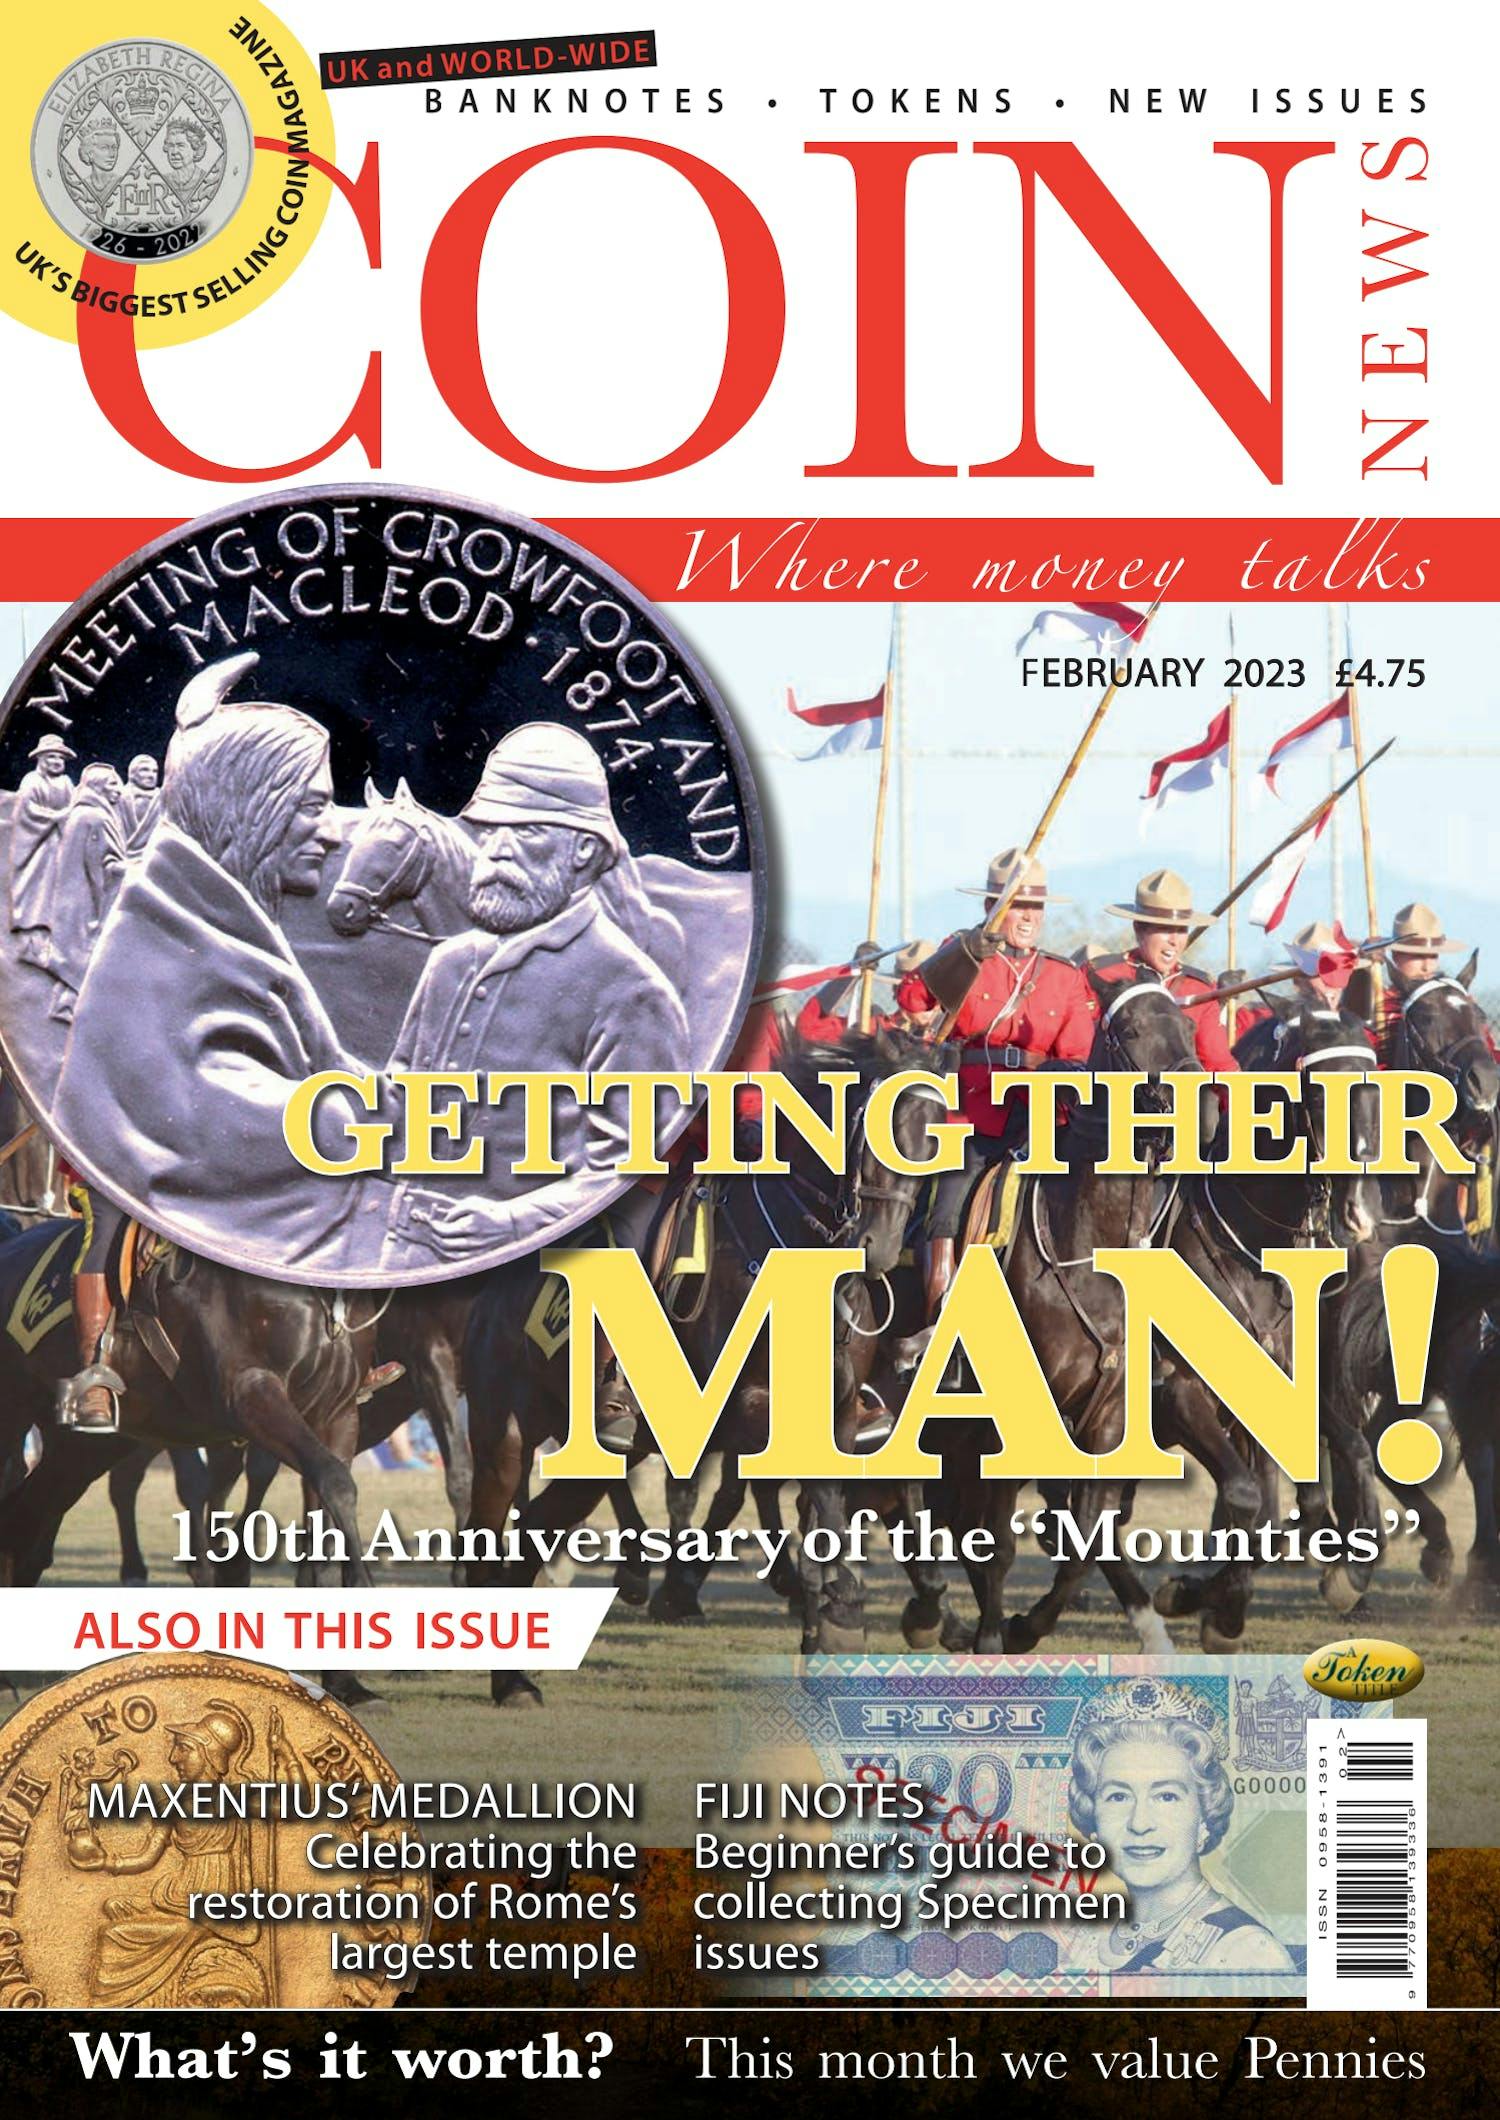 The front cover of Coin News, February 2023 - Volume 60, Number 2